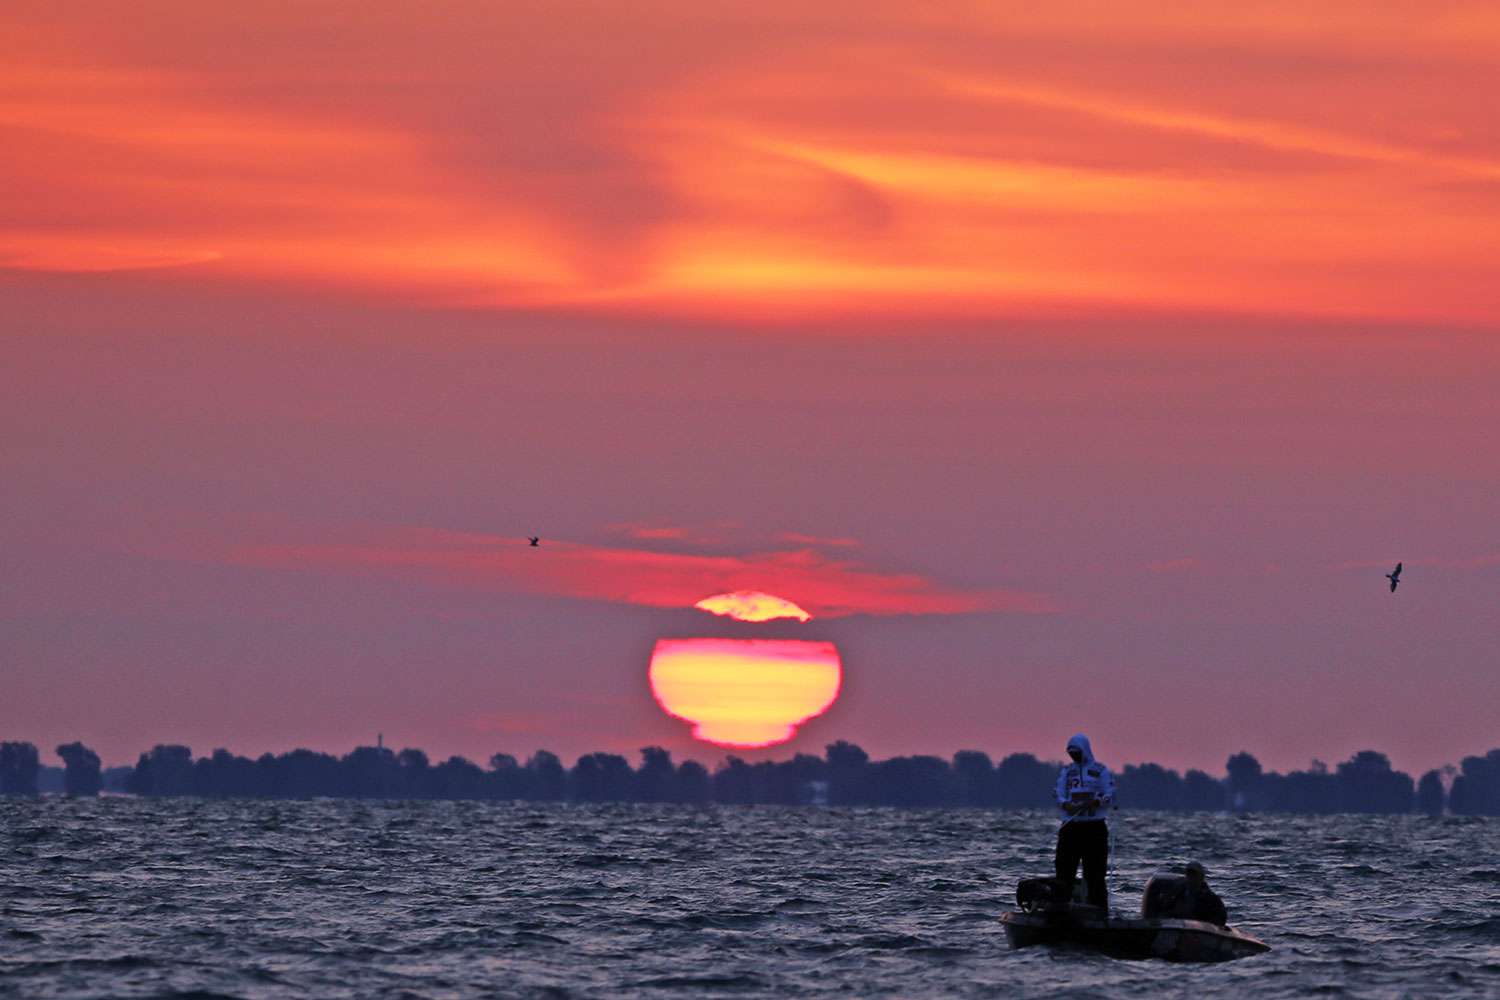 Join Bassmaster rookie Gerald Spohrer as he fishes the early morning hours on Championship Sunday at the Advance Auto Parts Bassmaster Elite at St. Clair.